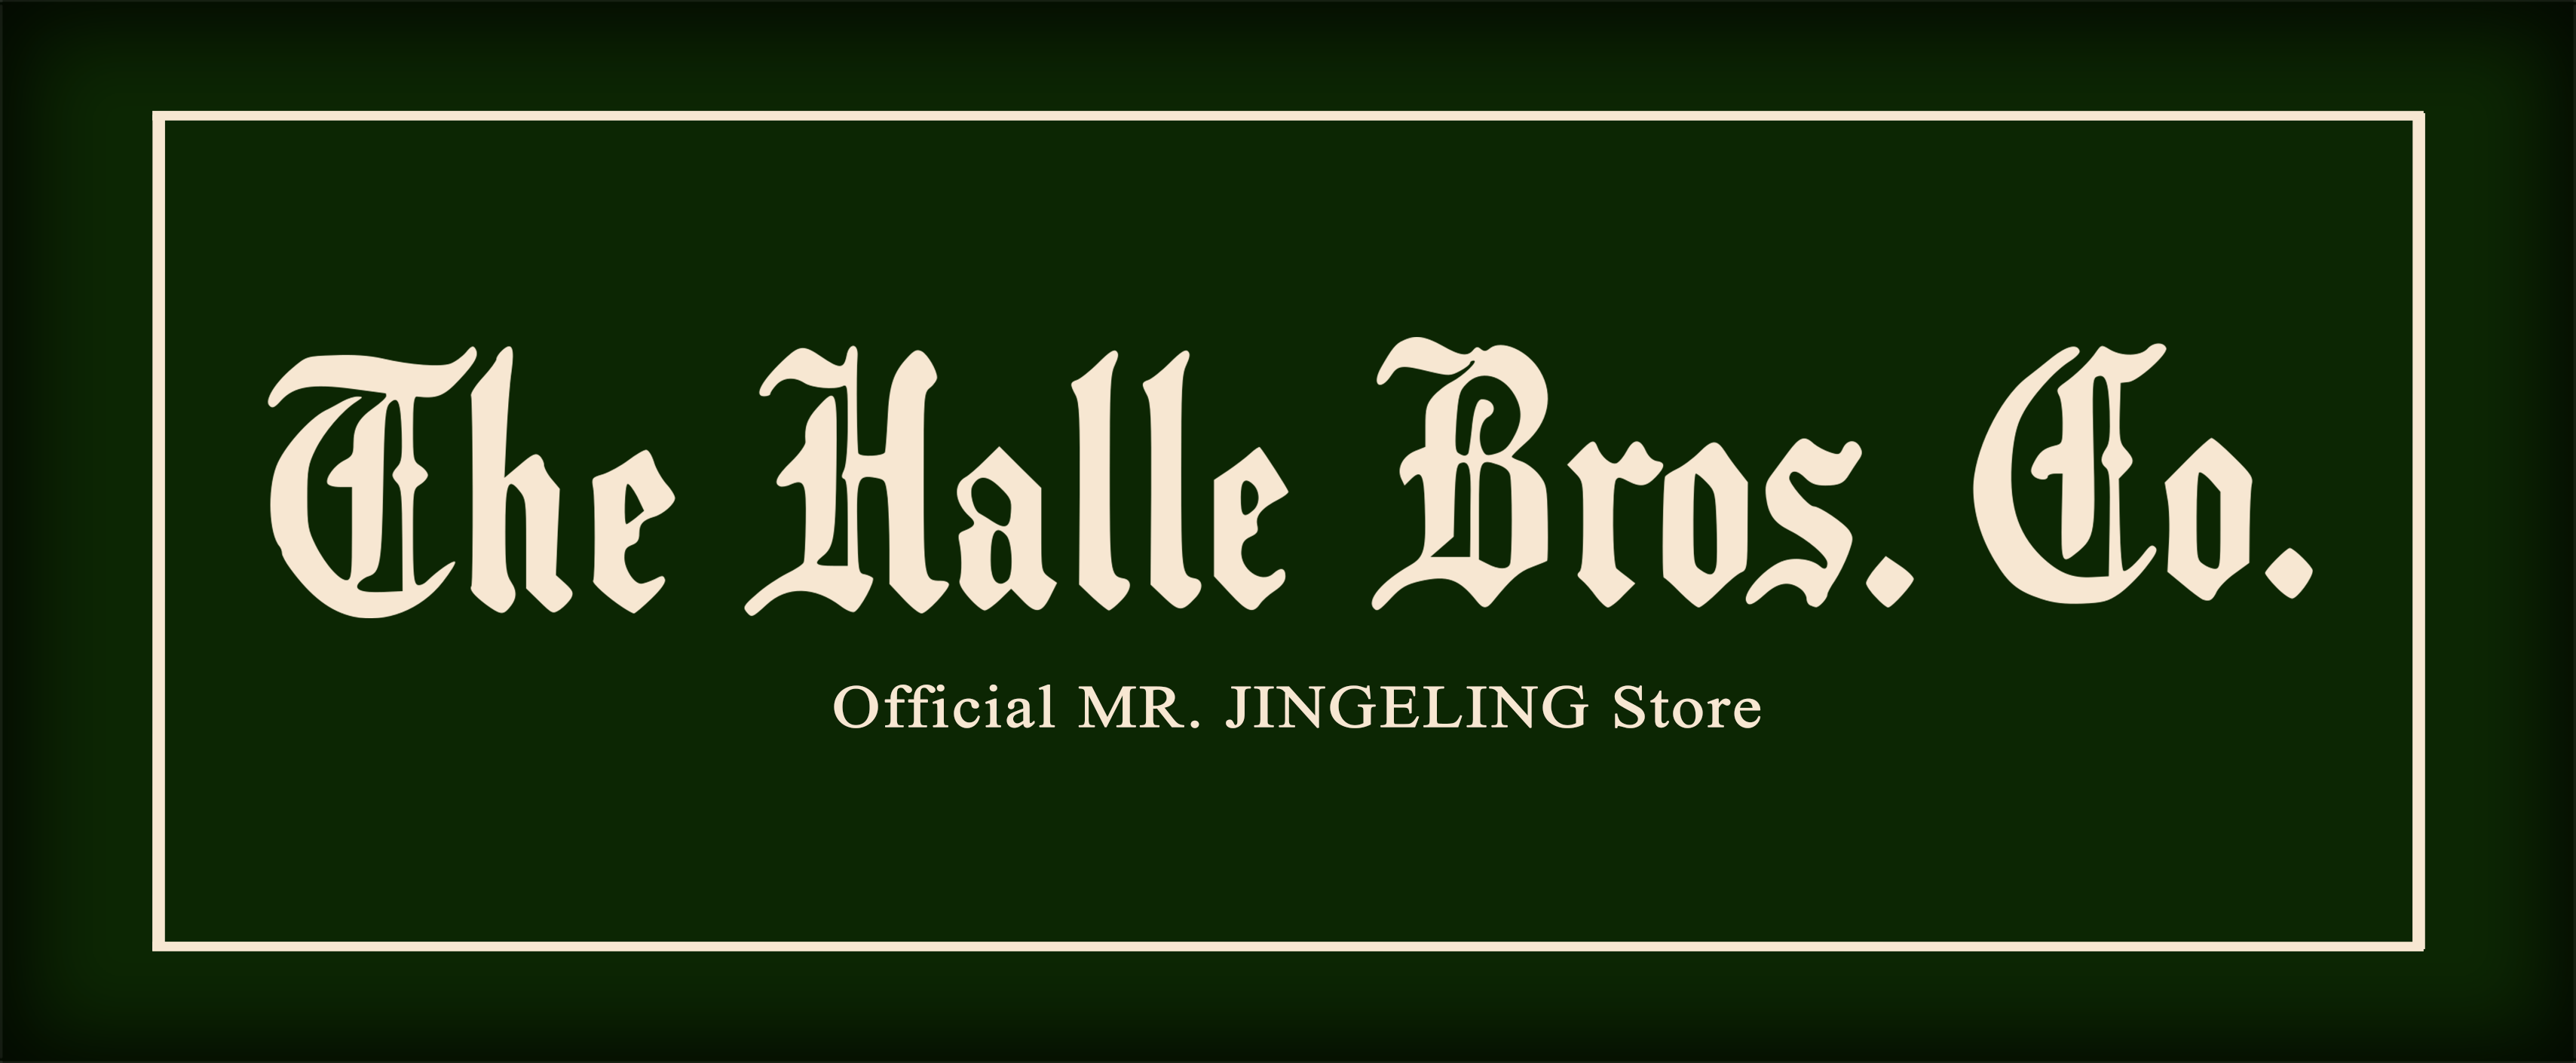 Shop Mr. Jingeling Merchandise at The Halle Bros. Co. Store